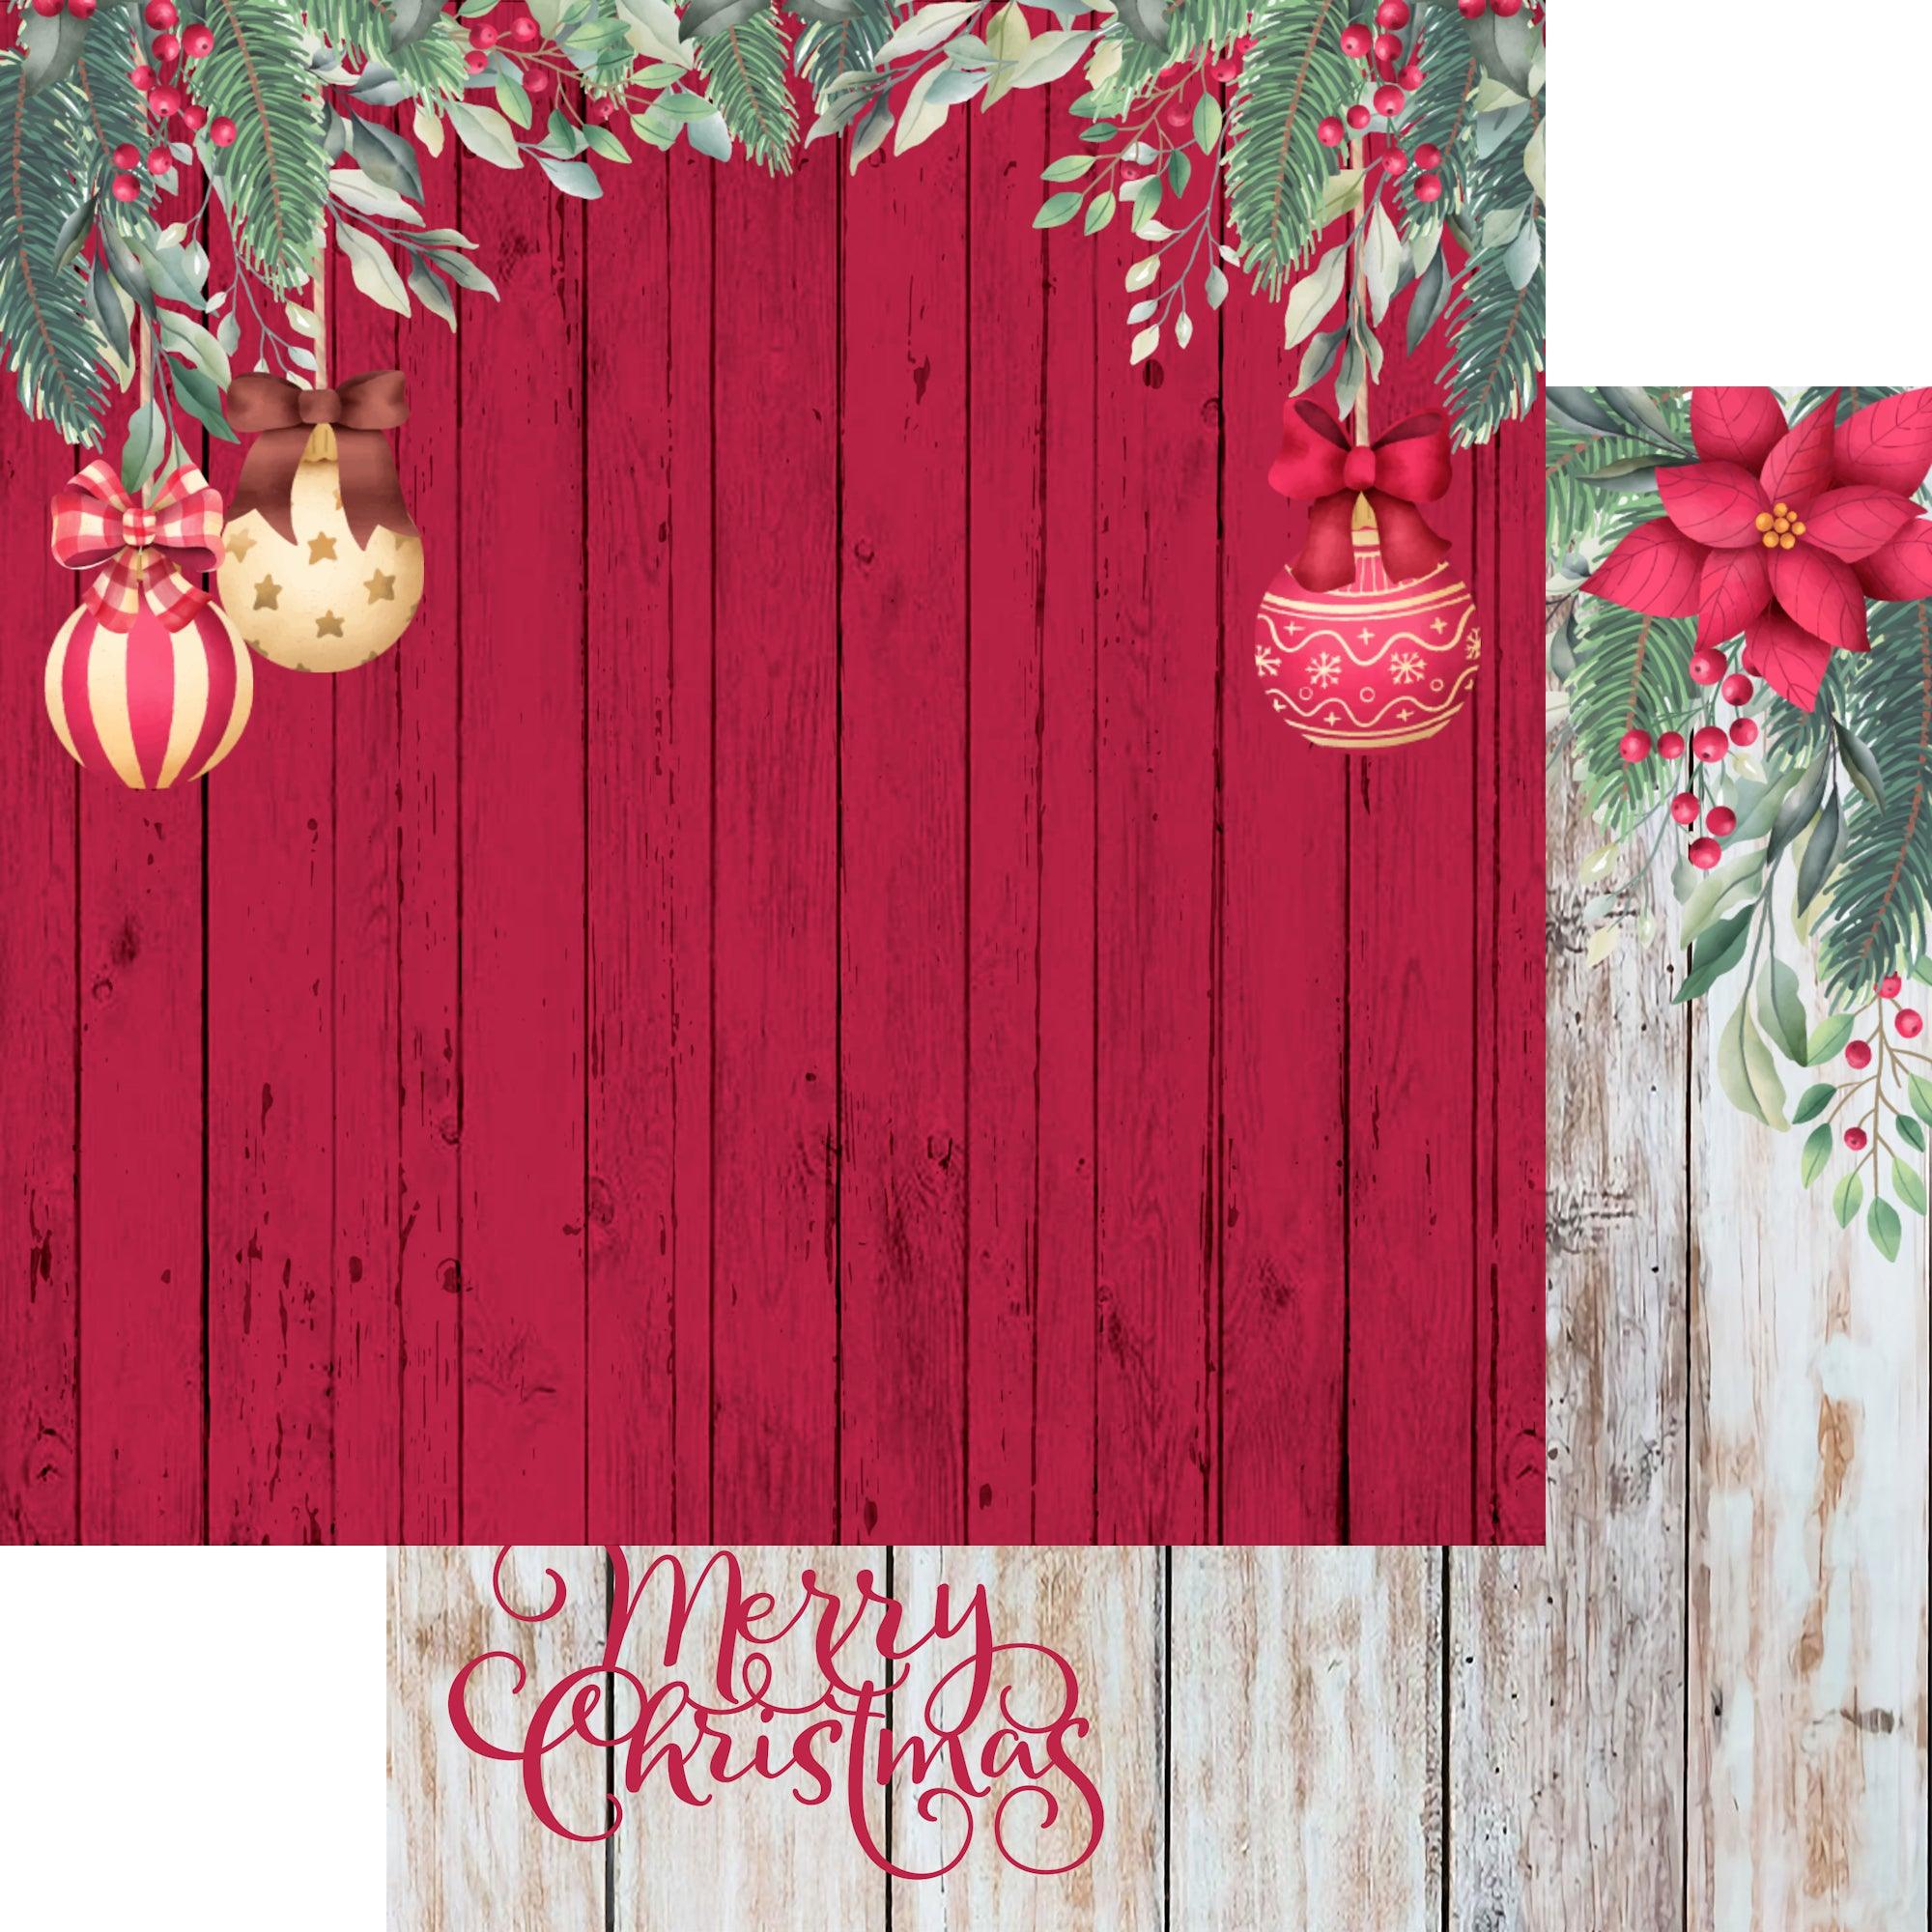 Country Christmas Watercolor Collection Merry Christmas 12 x 12 Double-Sided Scrapbook Paper by SSC Designs - Scrapbook Supply Companies